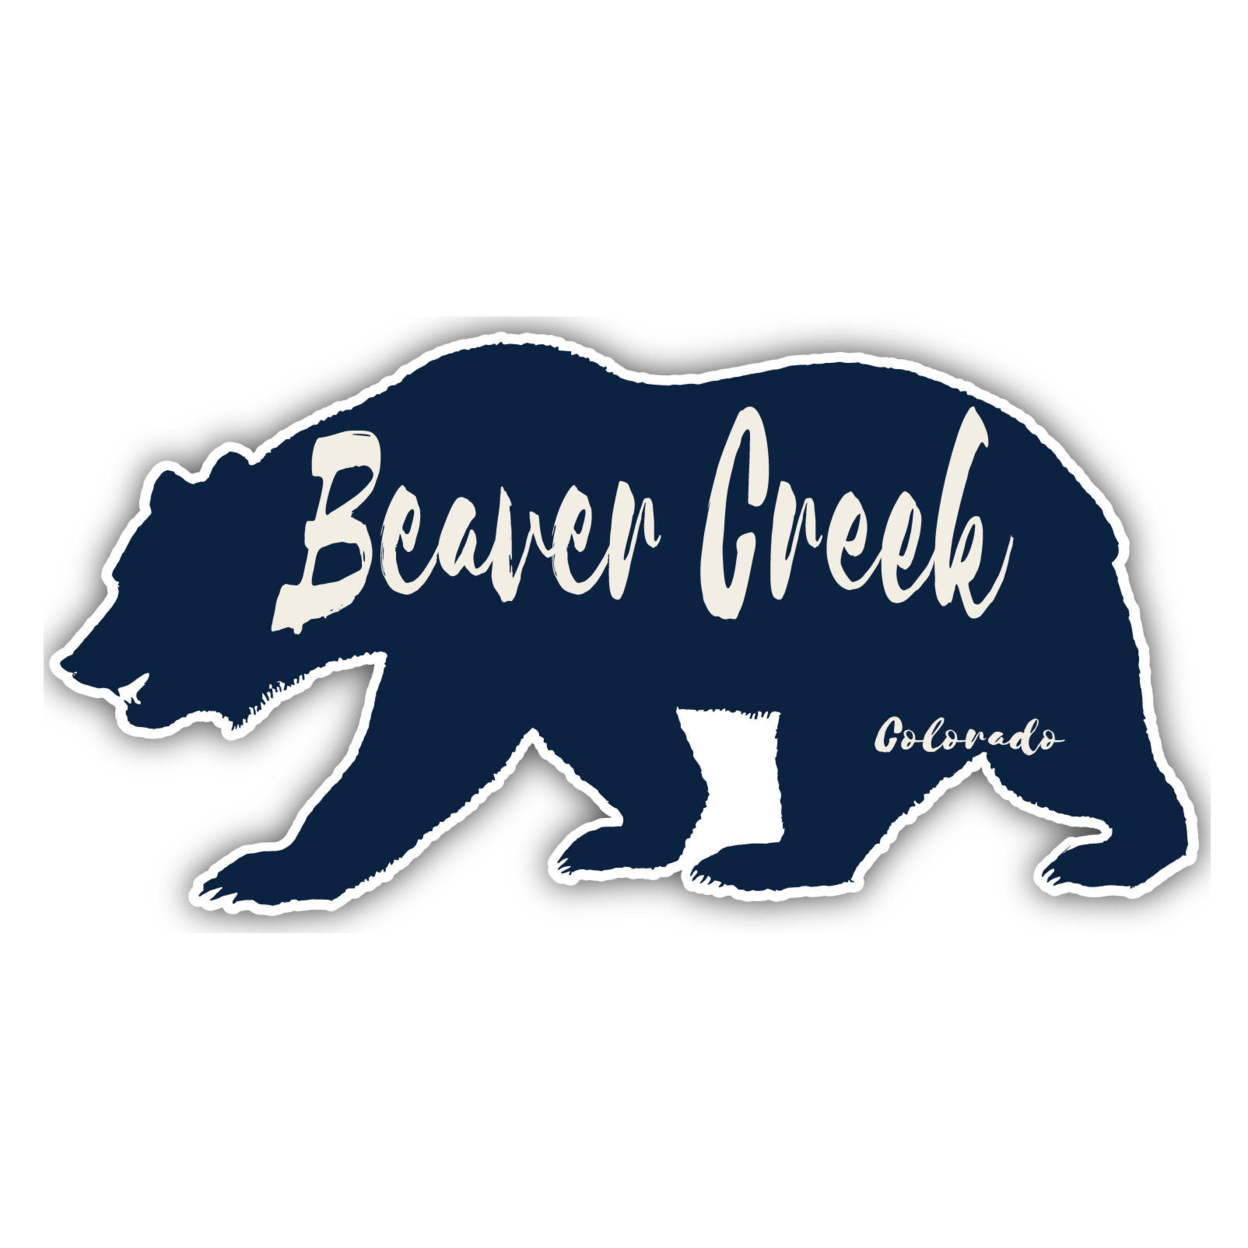 Beaver Creek Colorado Souvenir Decorative Stickers (Choose Theme And Size) - 4-Pack, 2-Inch, Great Outdoors